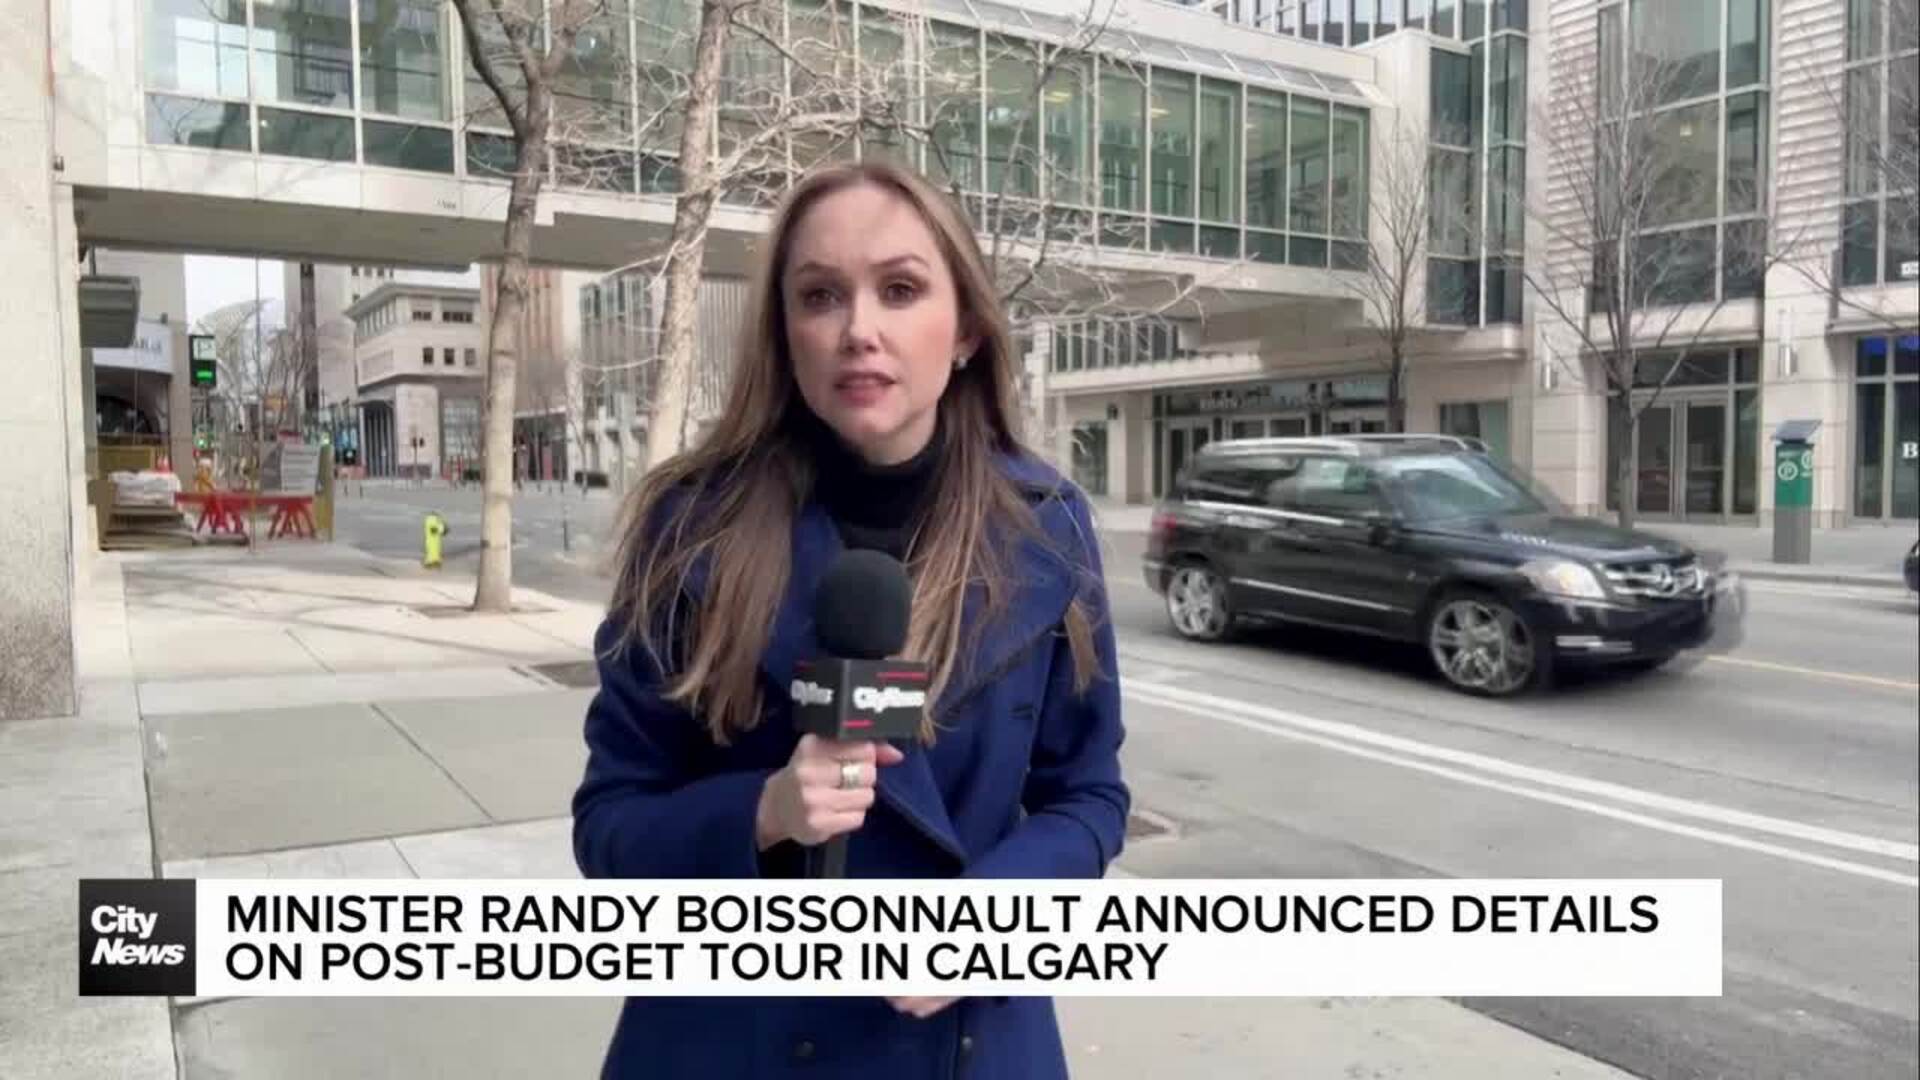 Minister Randy Boissonnault announced details on post-budget tour in Calgary